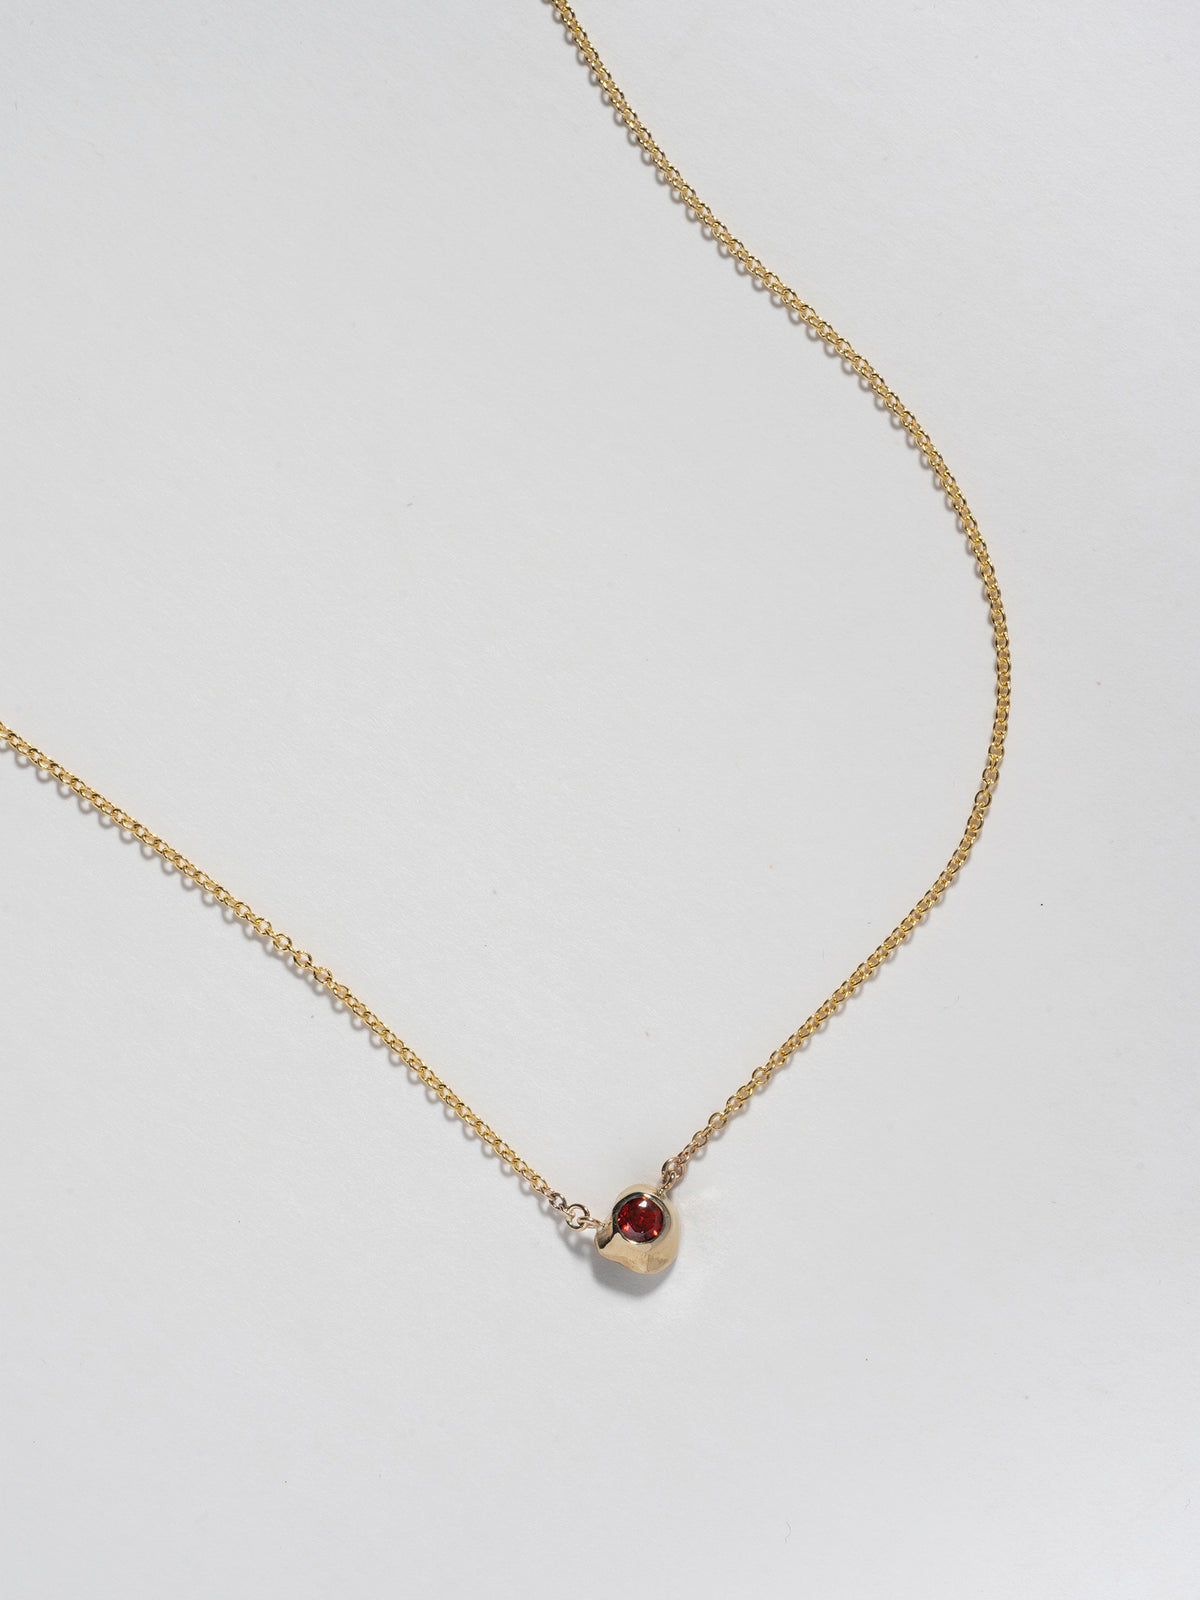 Close up image of FARIS KIRA Necklace pendant in 14k gold with garnet